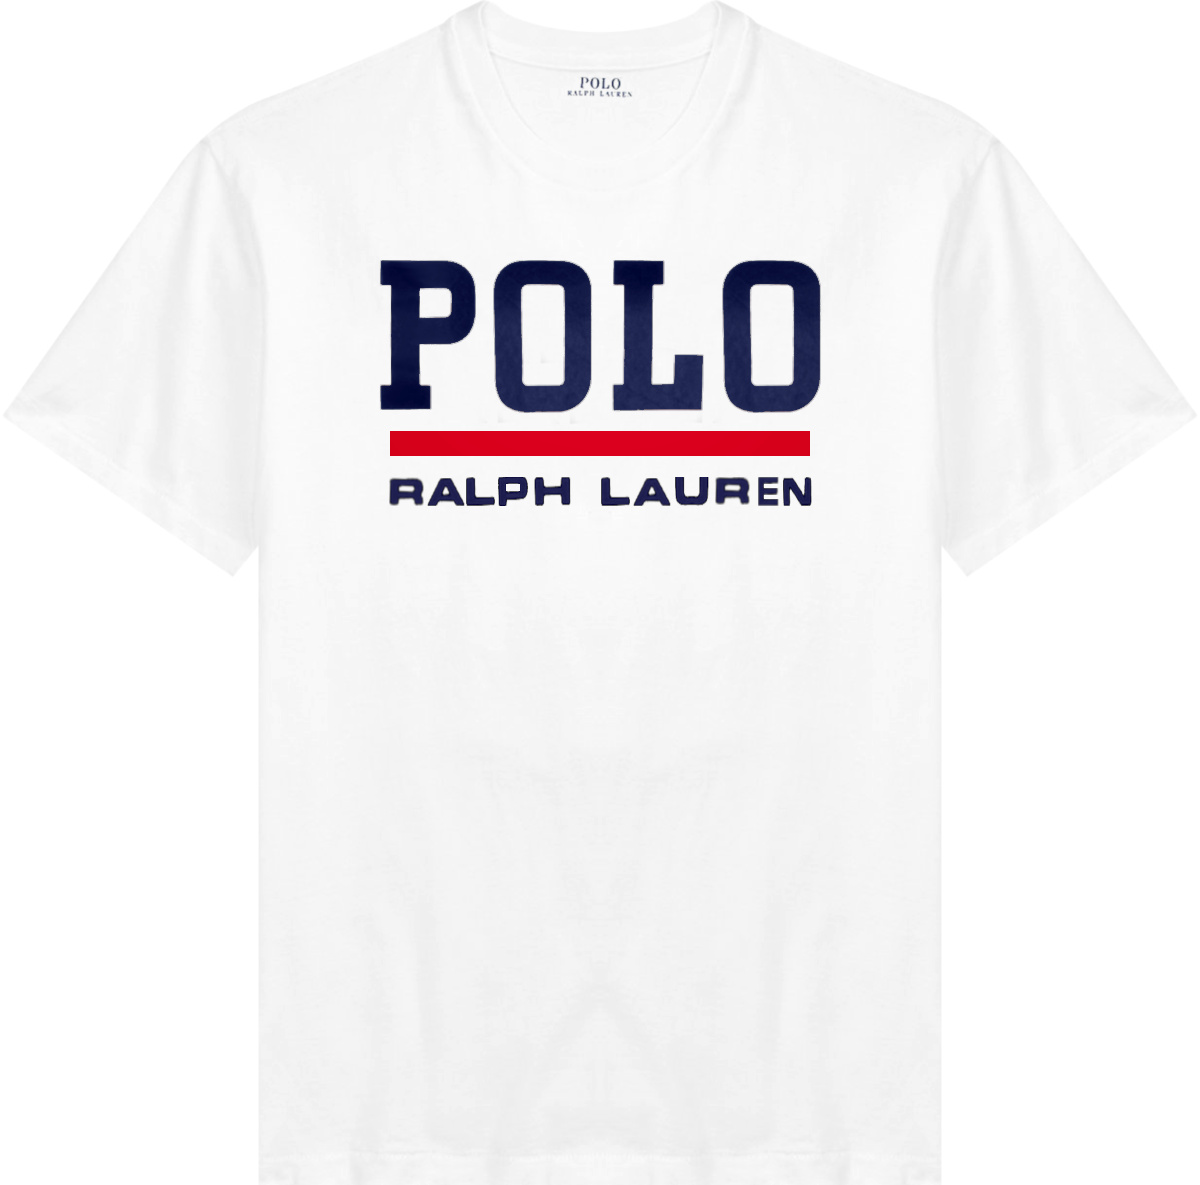 Polo Ralph Lauren White 'POLO' T-Shirt | Incorporated Style